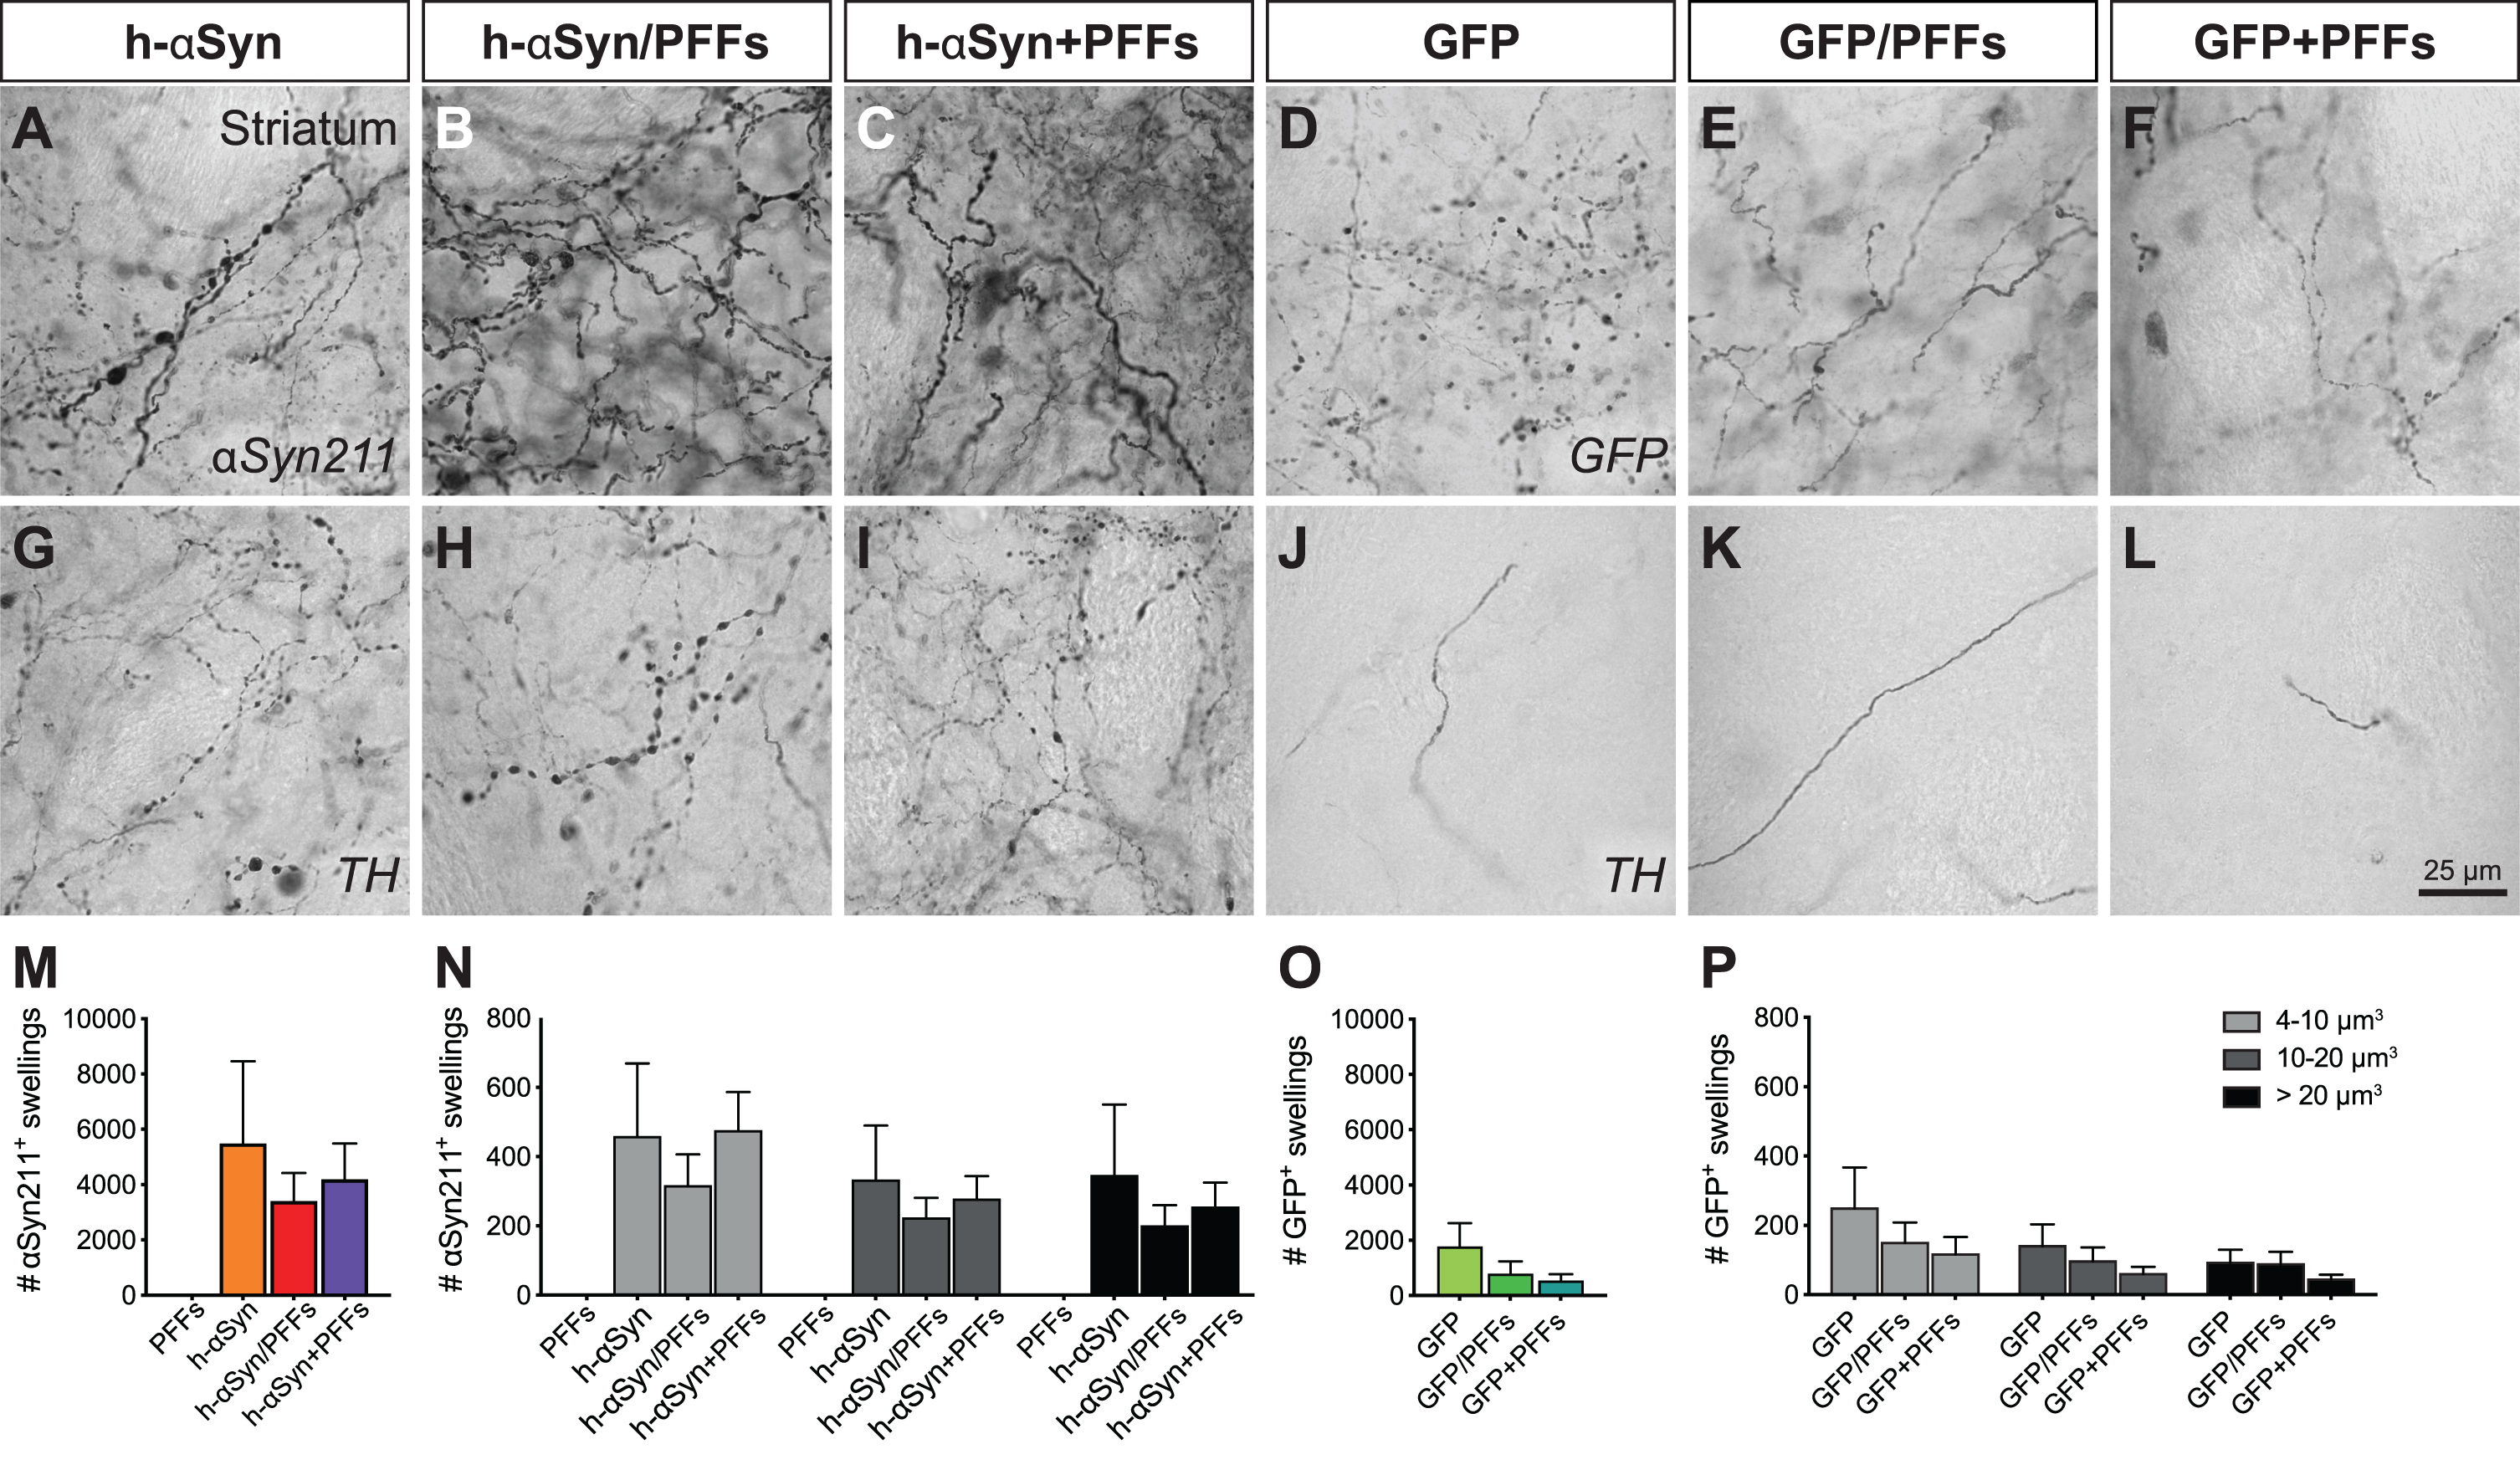 Axonal pathology in the ipsilateral striatum. Immunohistochemical analysis to investigate the presence of axonal pathology using antibodies for αSyn211 (A-C), GFP (D-F), and TH (G-L). Quantification of αSyn211+ (M,N) and GFP+ swellings (O,P) in the ipsilateral striatum. The quantified swellings were counted by total number (M,O) and volume size (N,P). PFFs, preformed fibrils; h-αSyn, human alpha-synuclein; GFP, green fluorescent protein. Data are expressed as mean ± SEM.